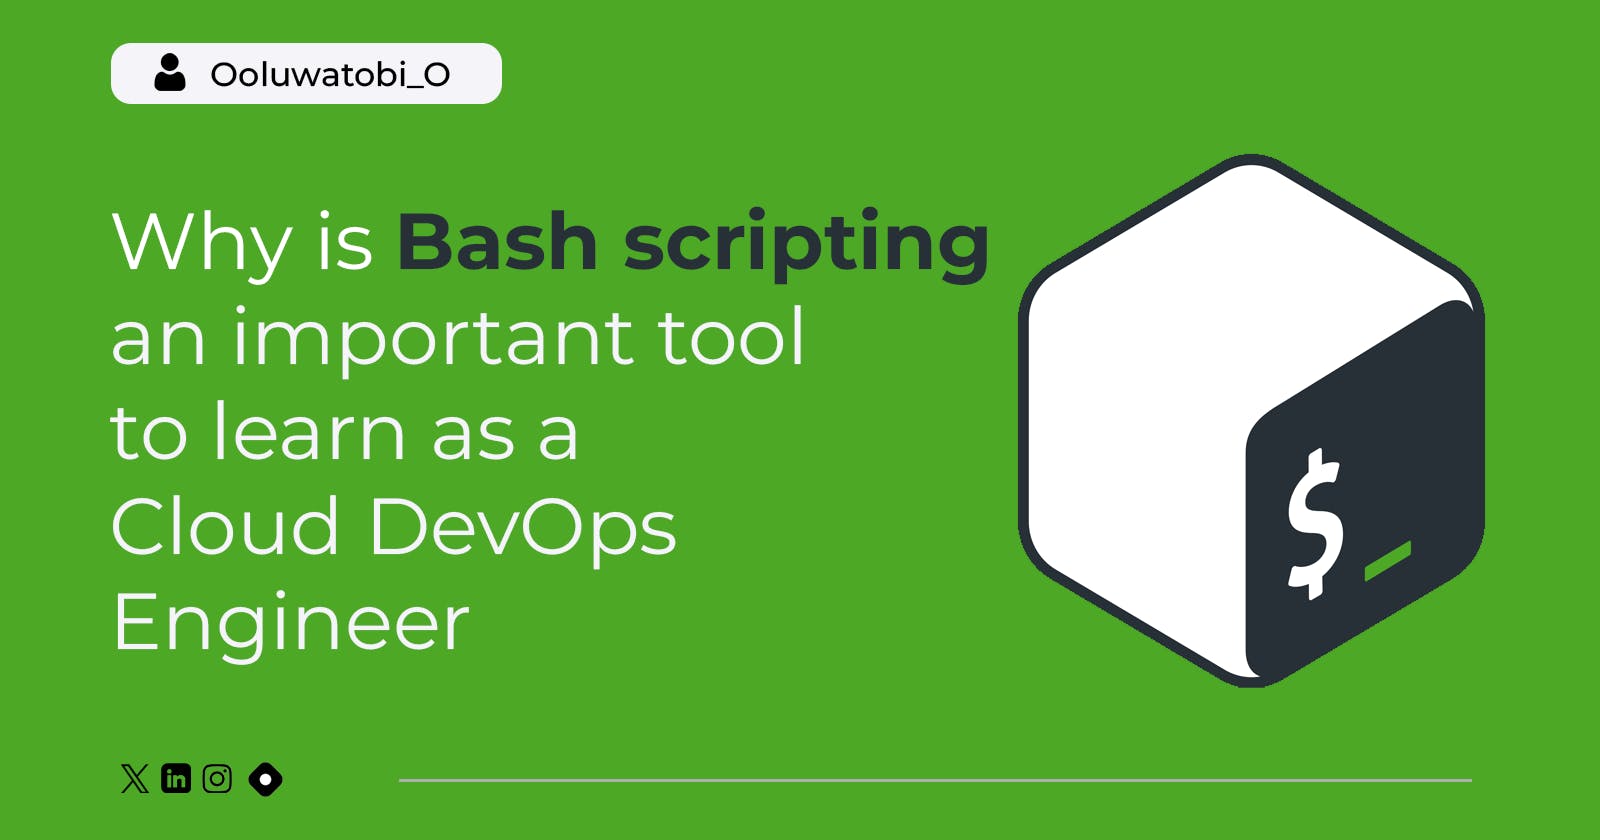 Why Is Bash scripting an important tool to learn as a Cloud DevOps engineer?